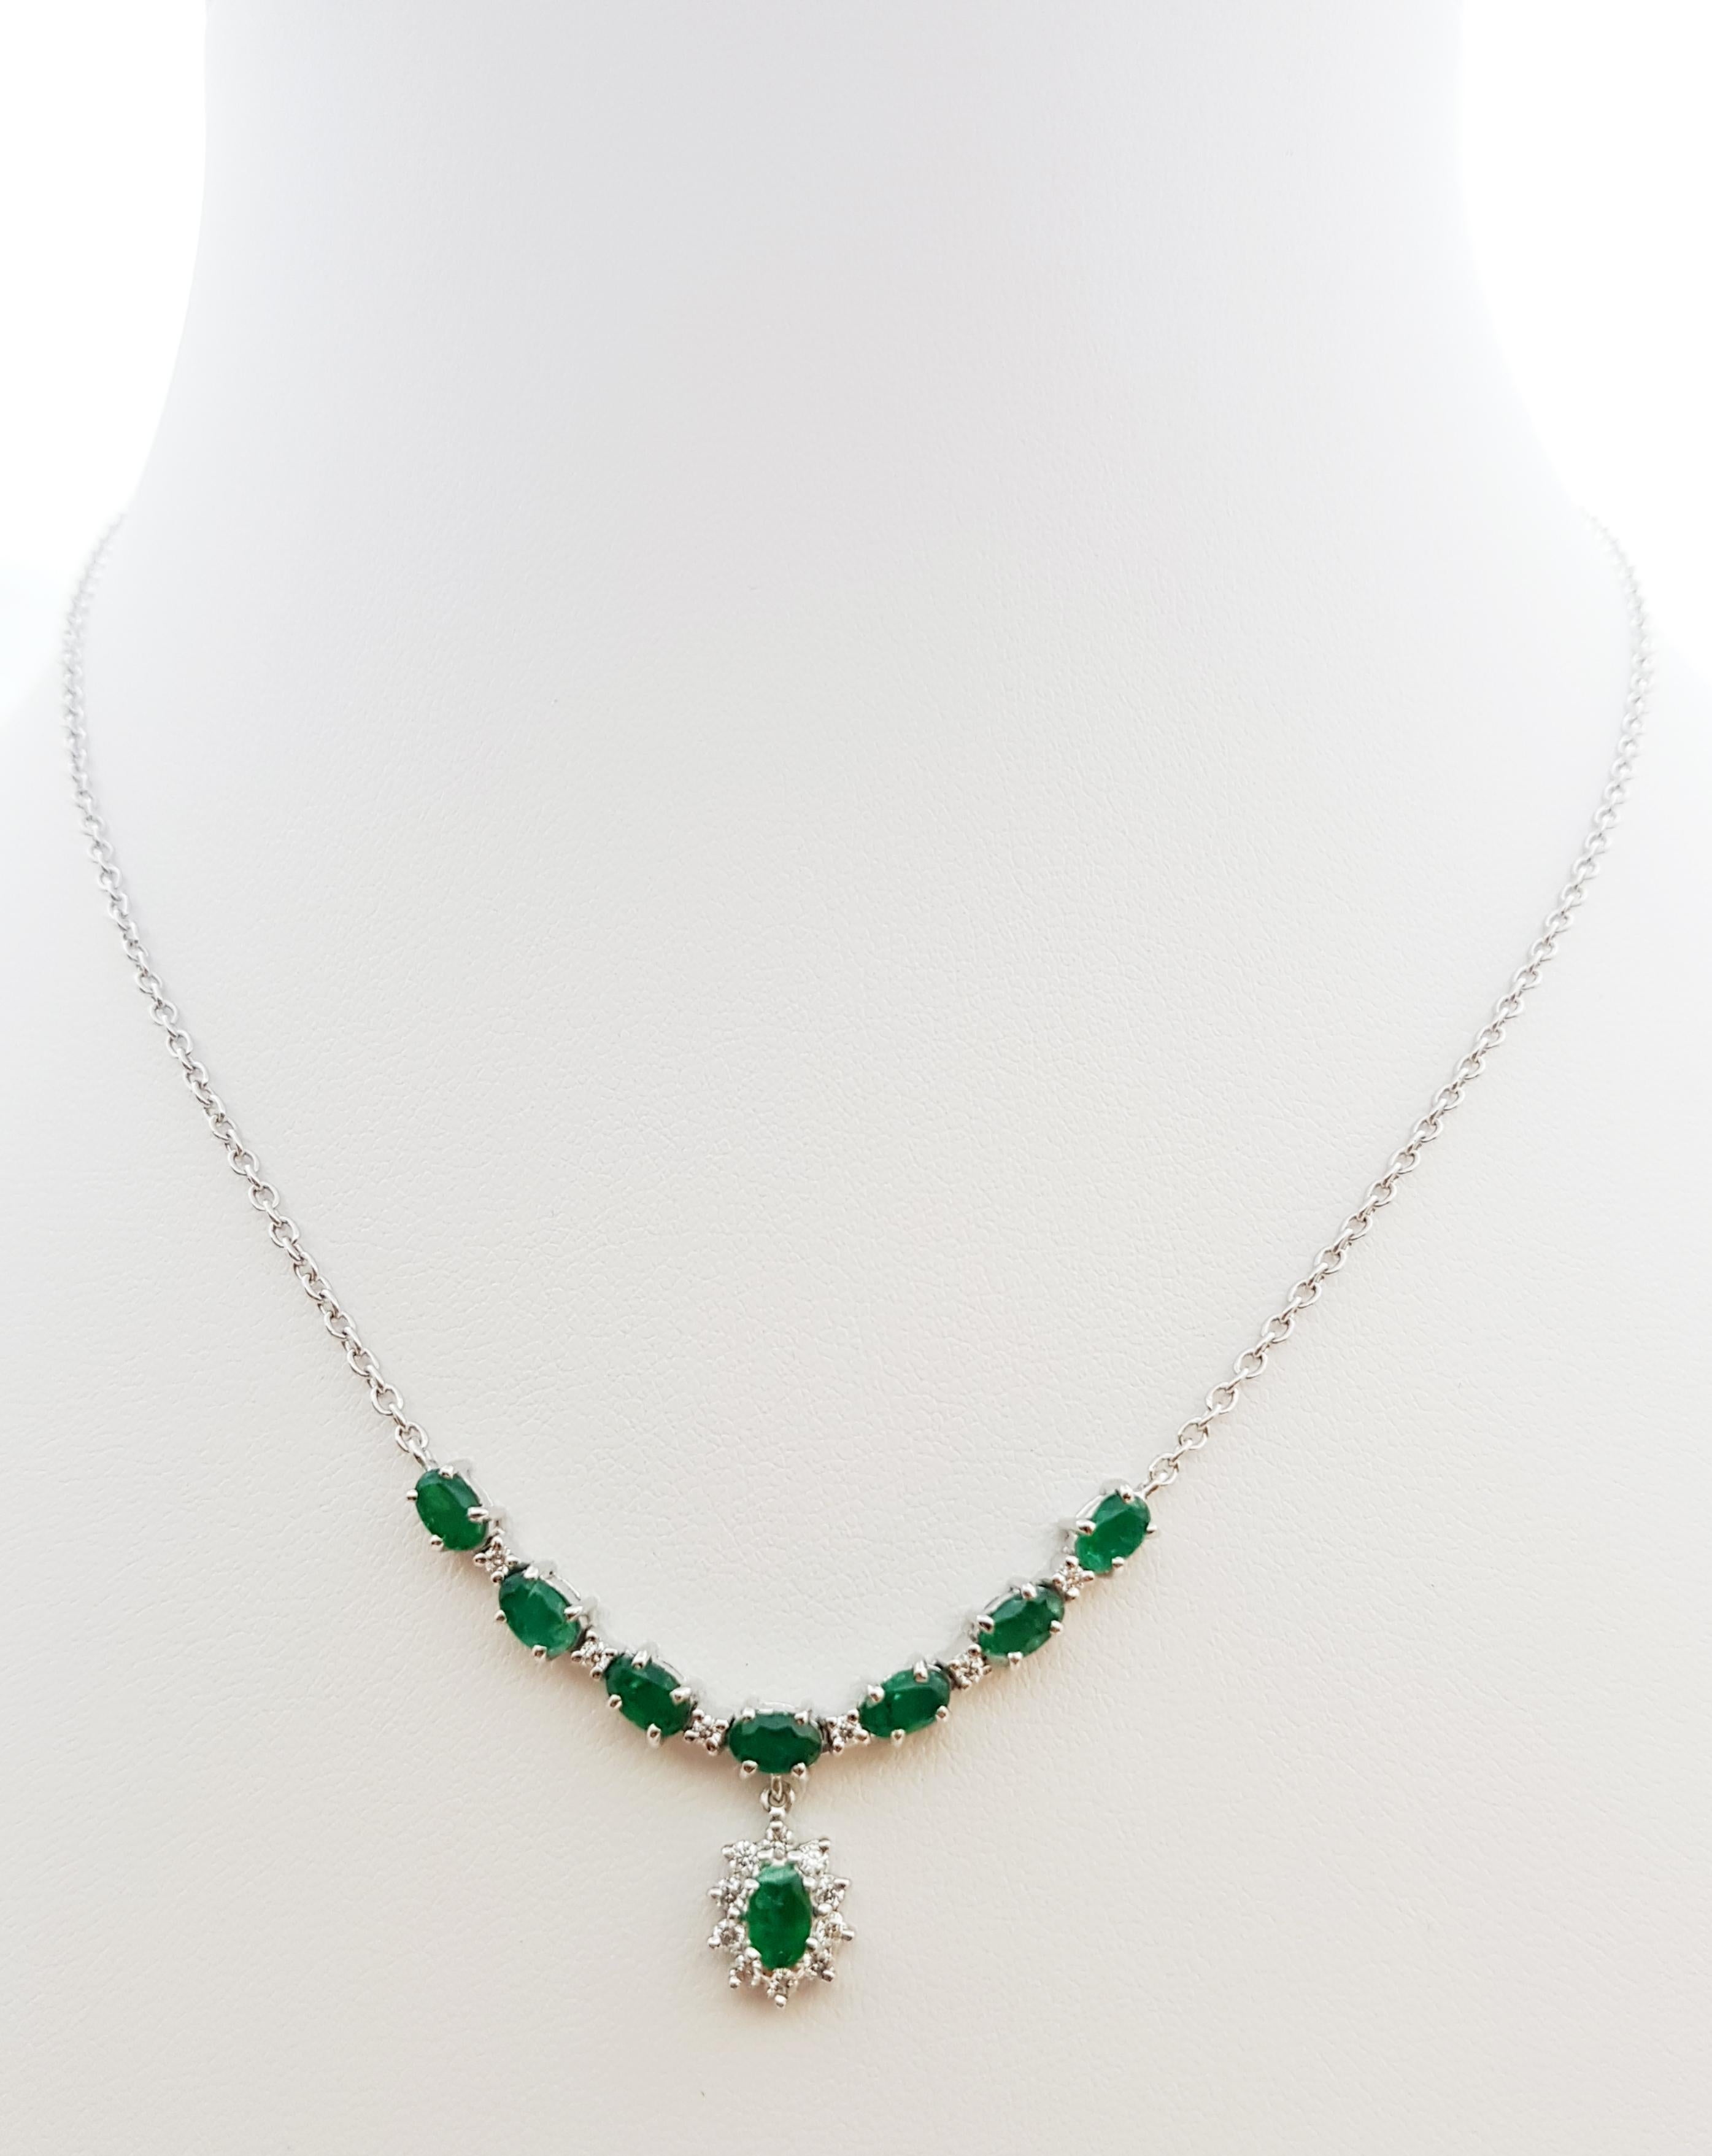 Emerald 2.15 carats with Diamond 0.30 carat Necklace set in 18 Karat White Gold Settings

Width: 1.6 cm 
Length: 43.5 cm
Total Weight: 8.25 grams

